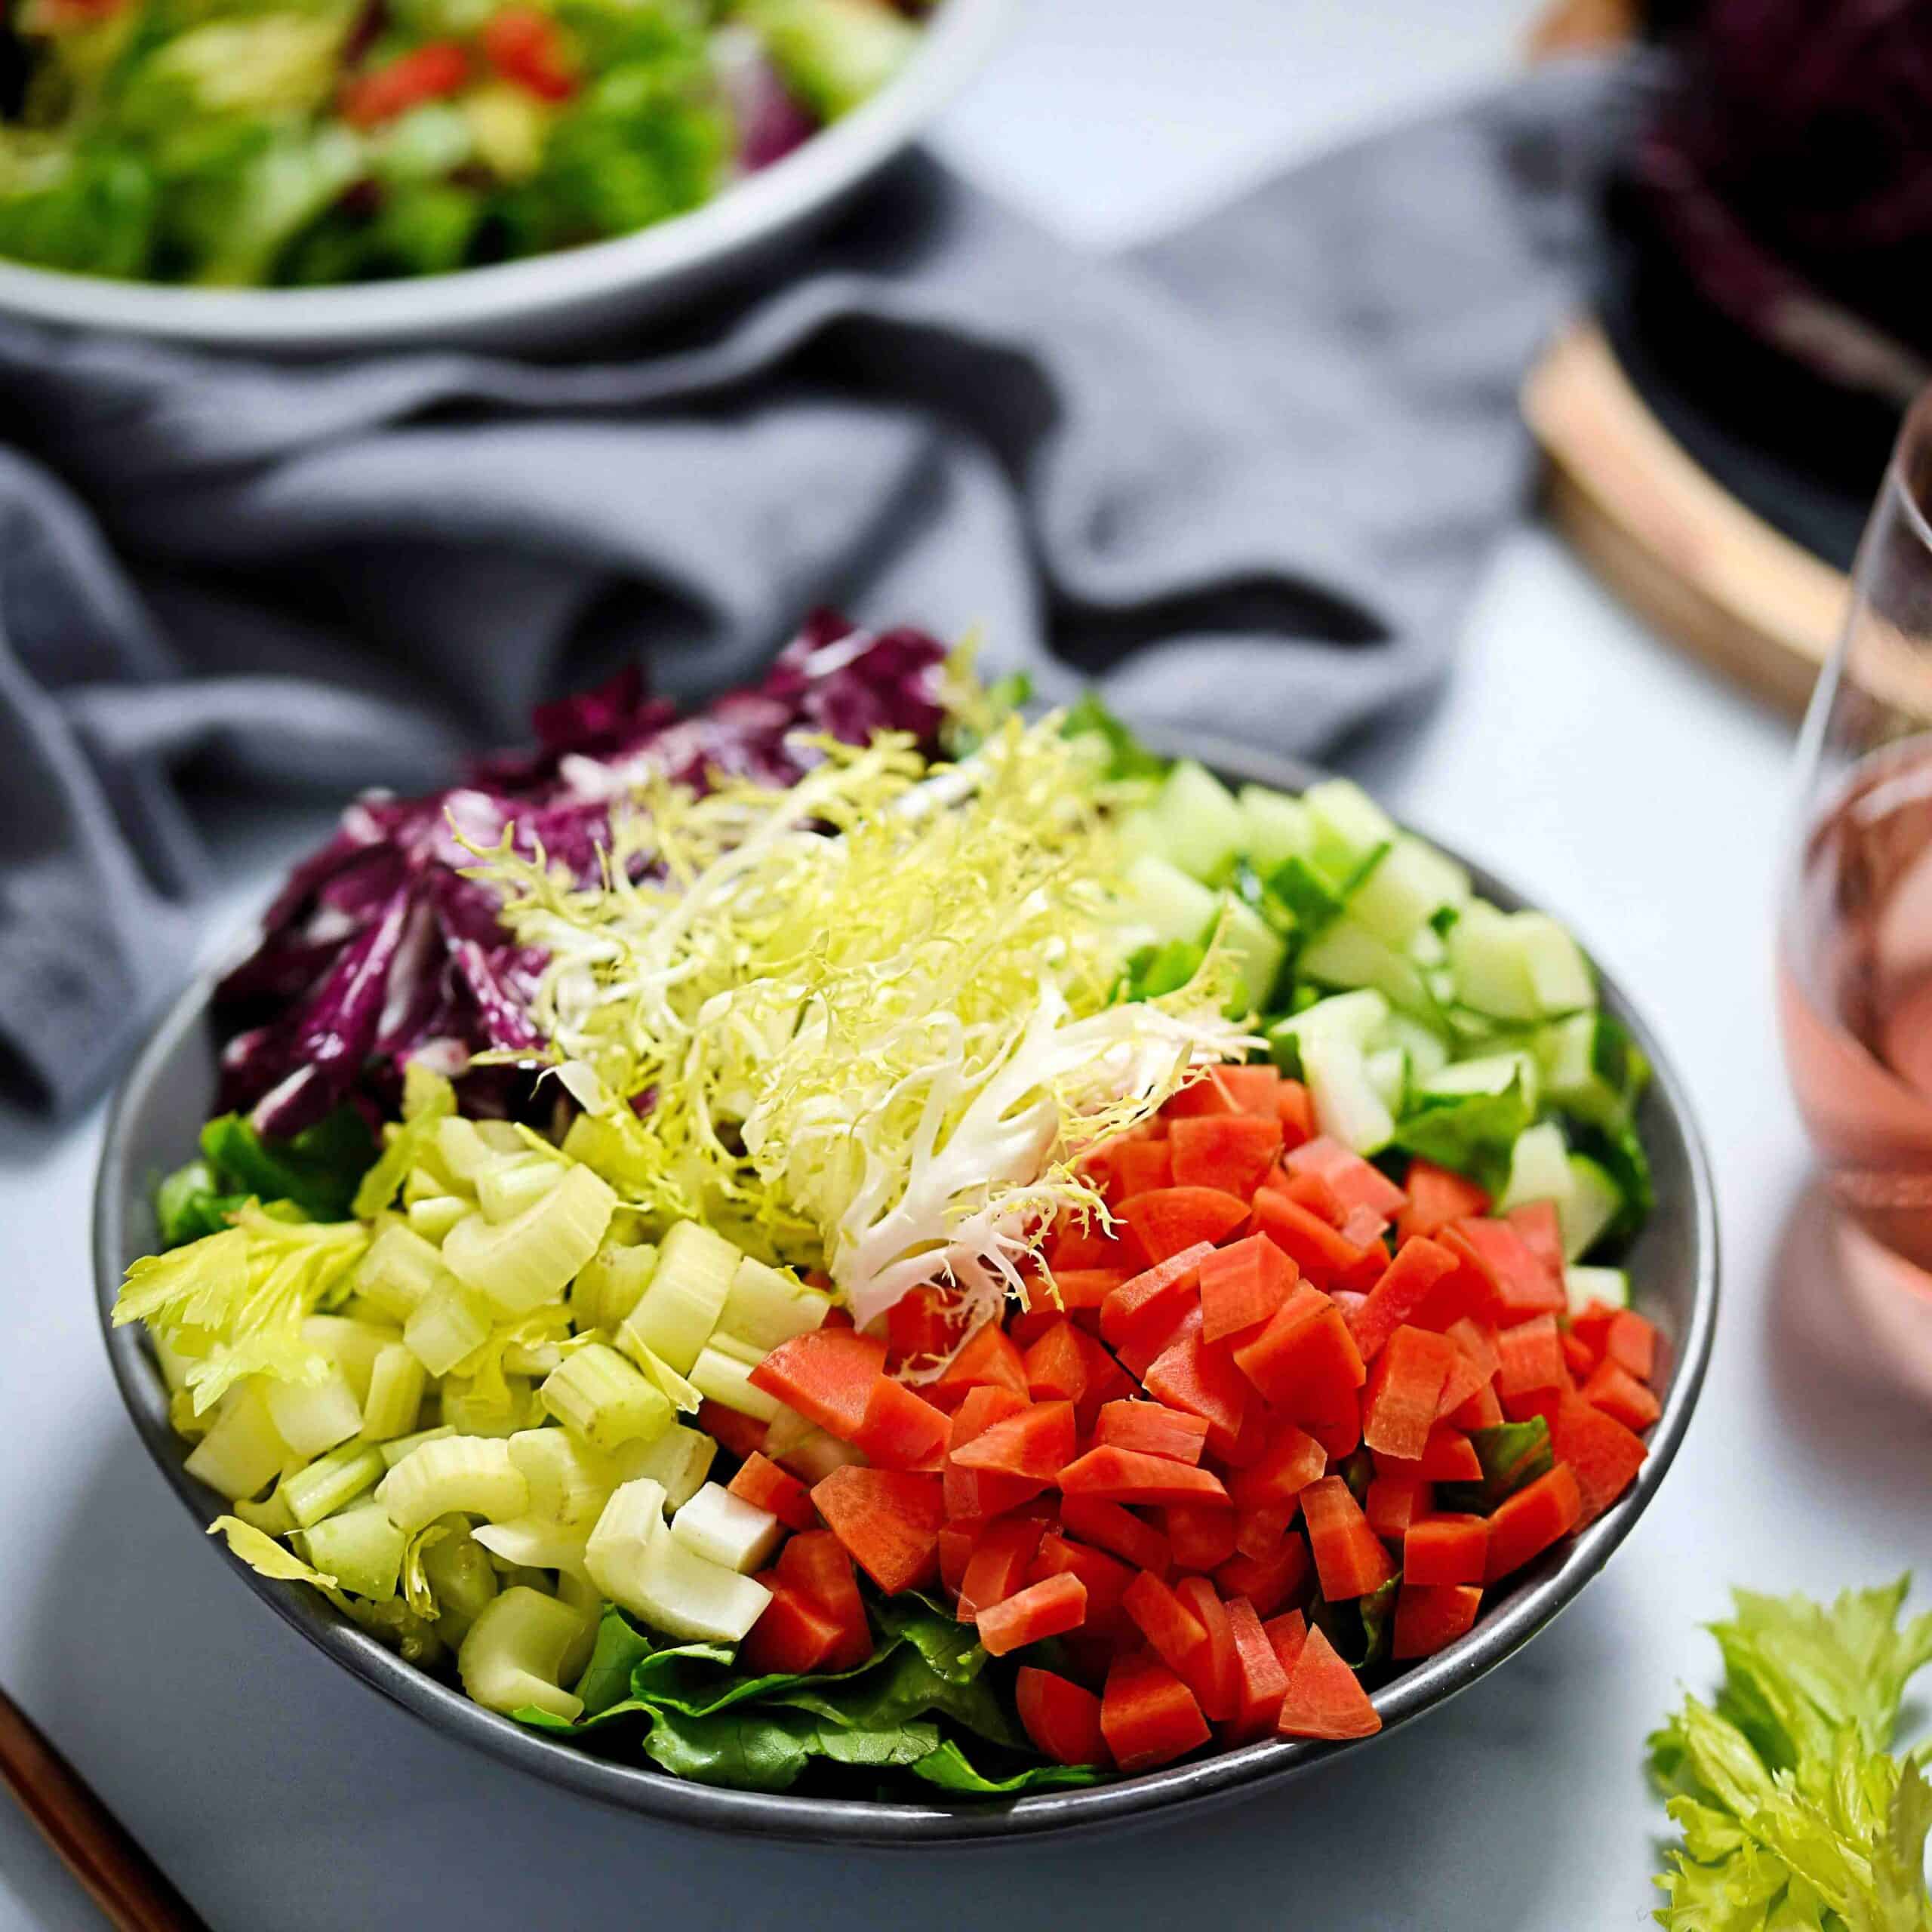 Salad with two dressings